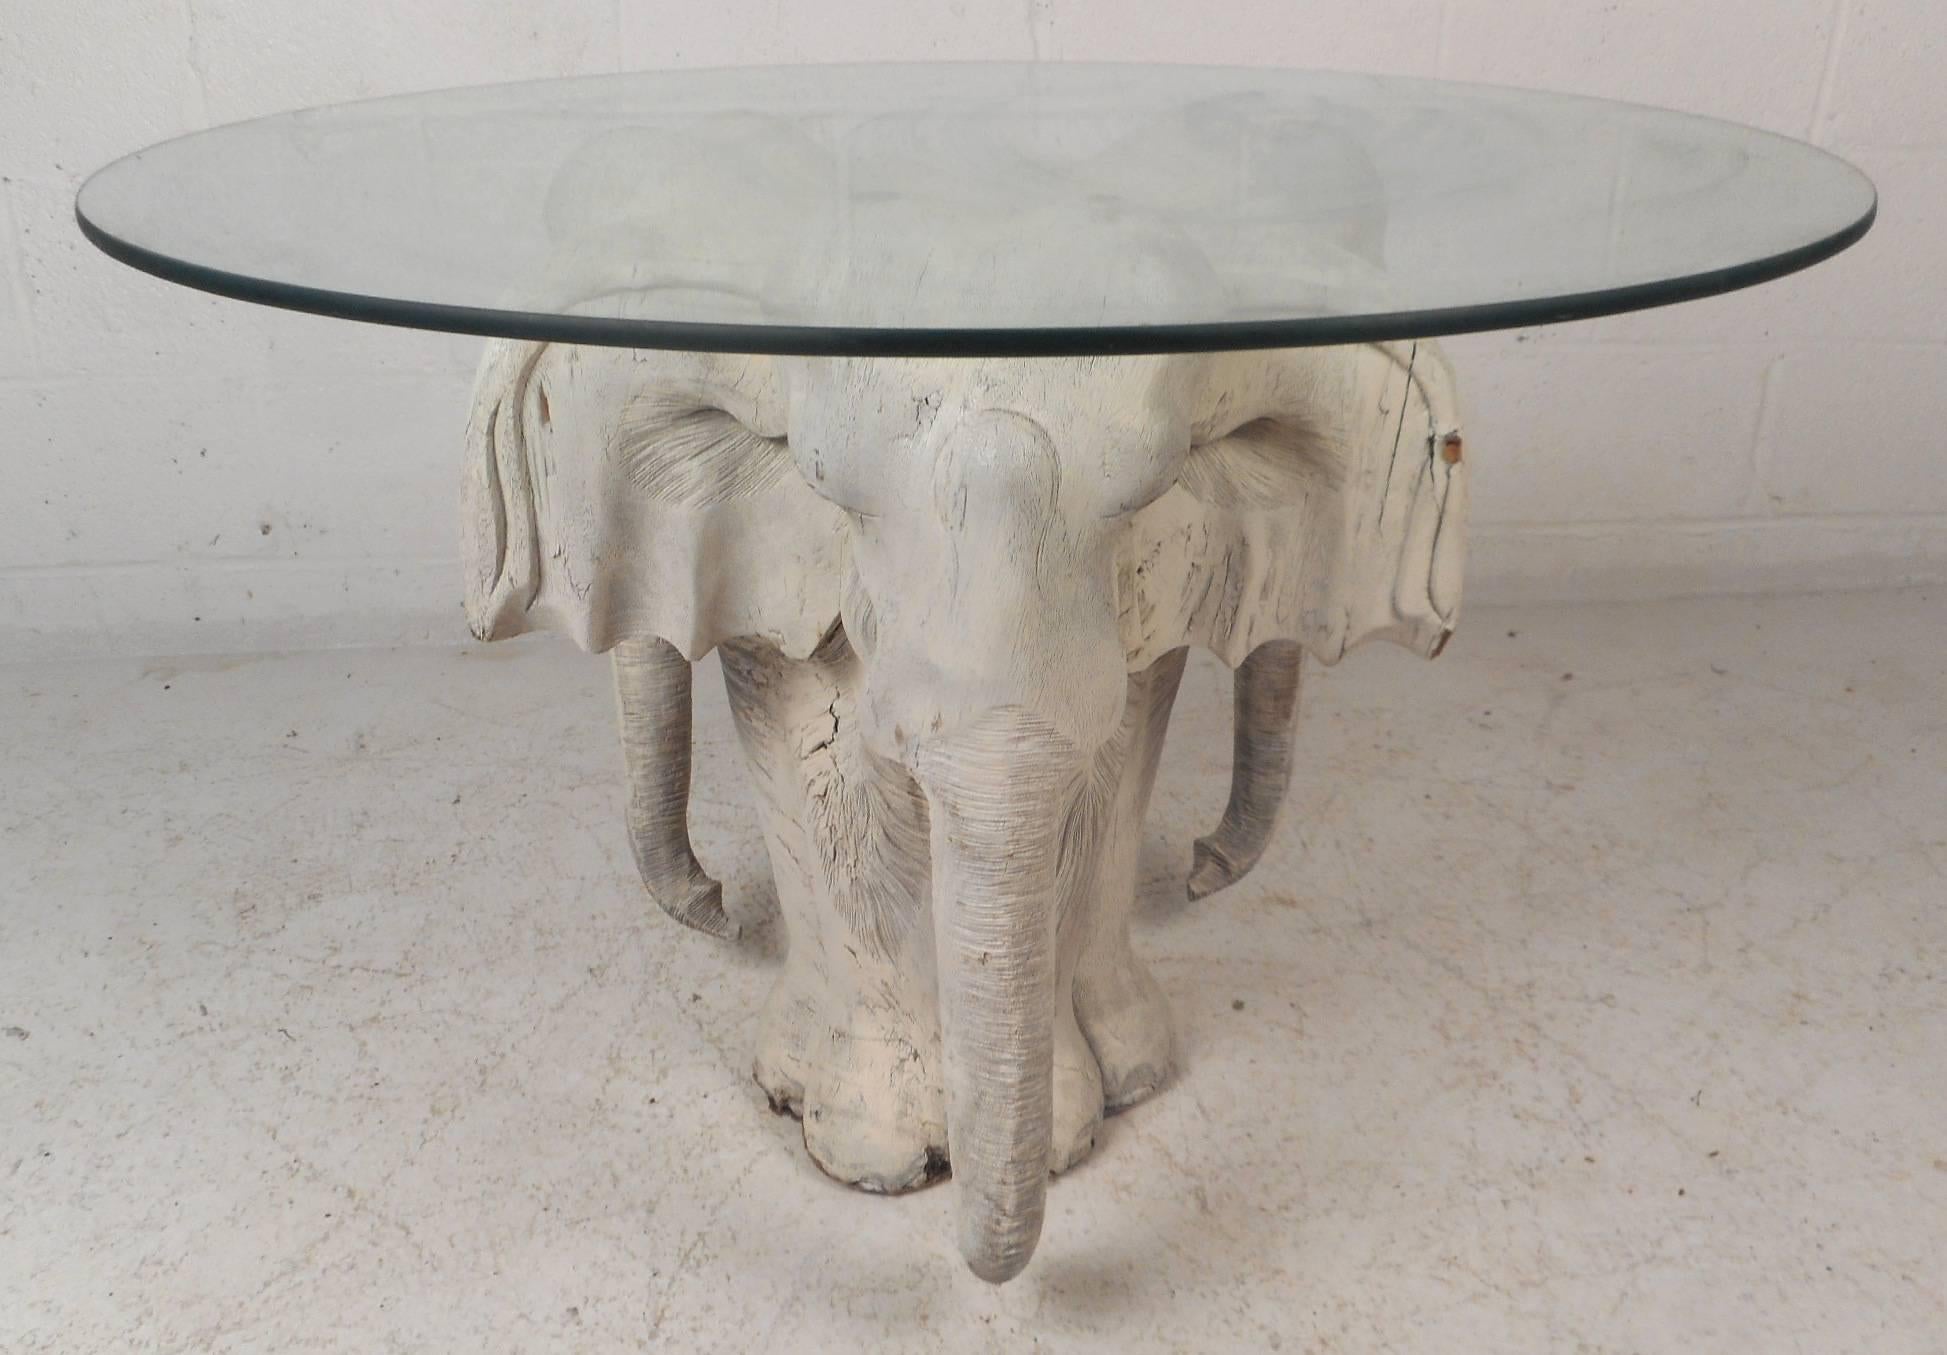 This beautiful vintage modern coffee table features a hand-carved wood base displaying an elephant on three sides. Unusual design with exquisite detail from the tusk to the ears. Sleek and Primitive piece has a round glass top with a tint of green.